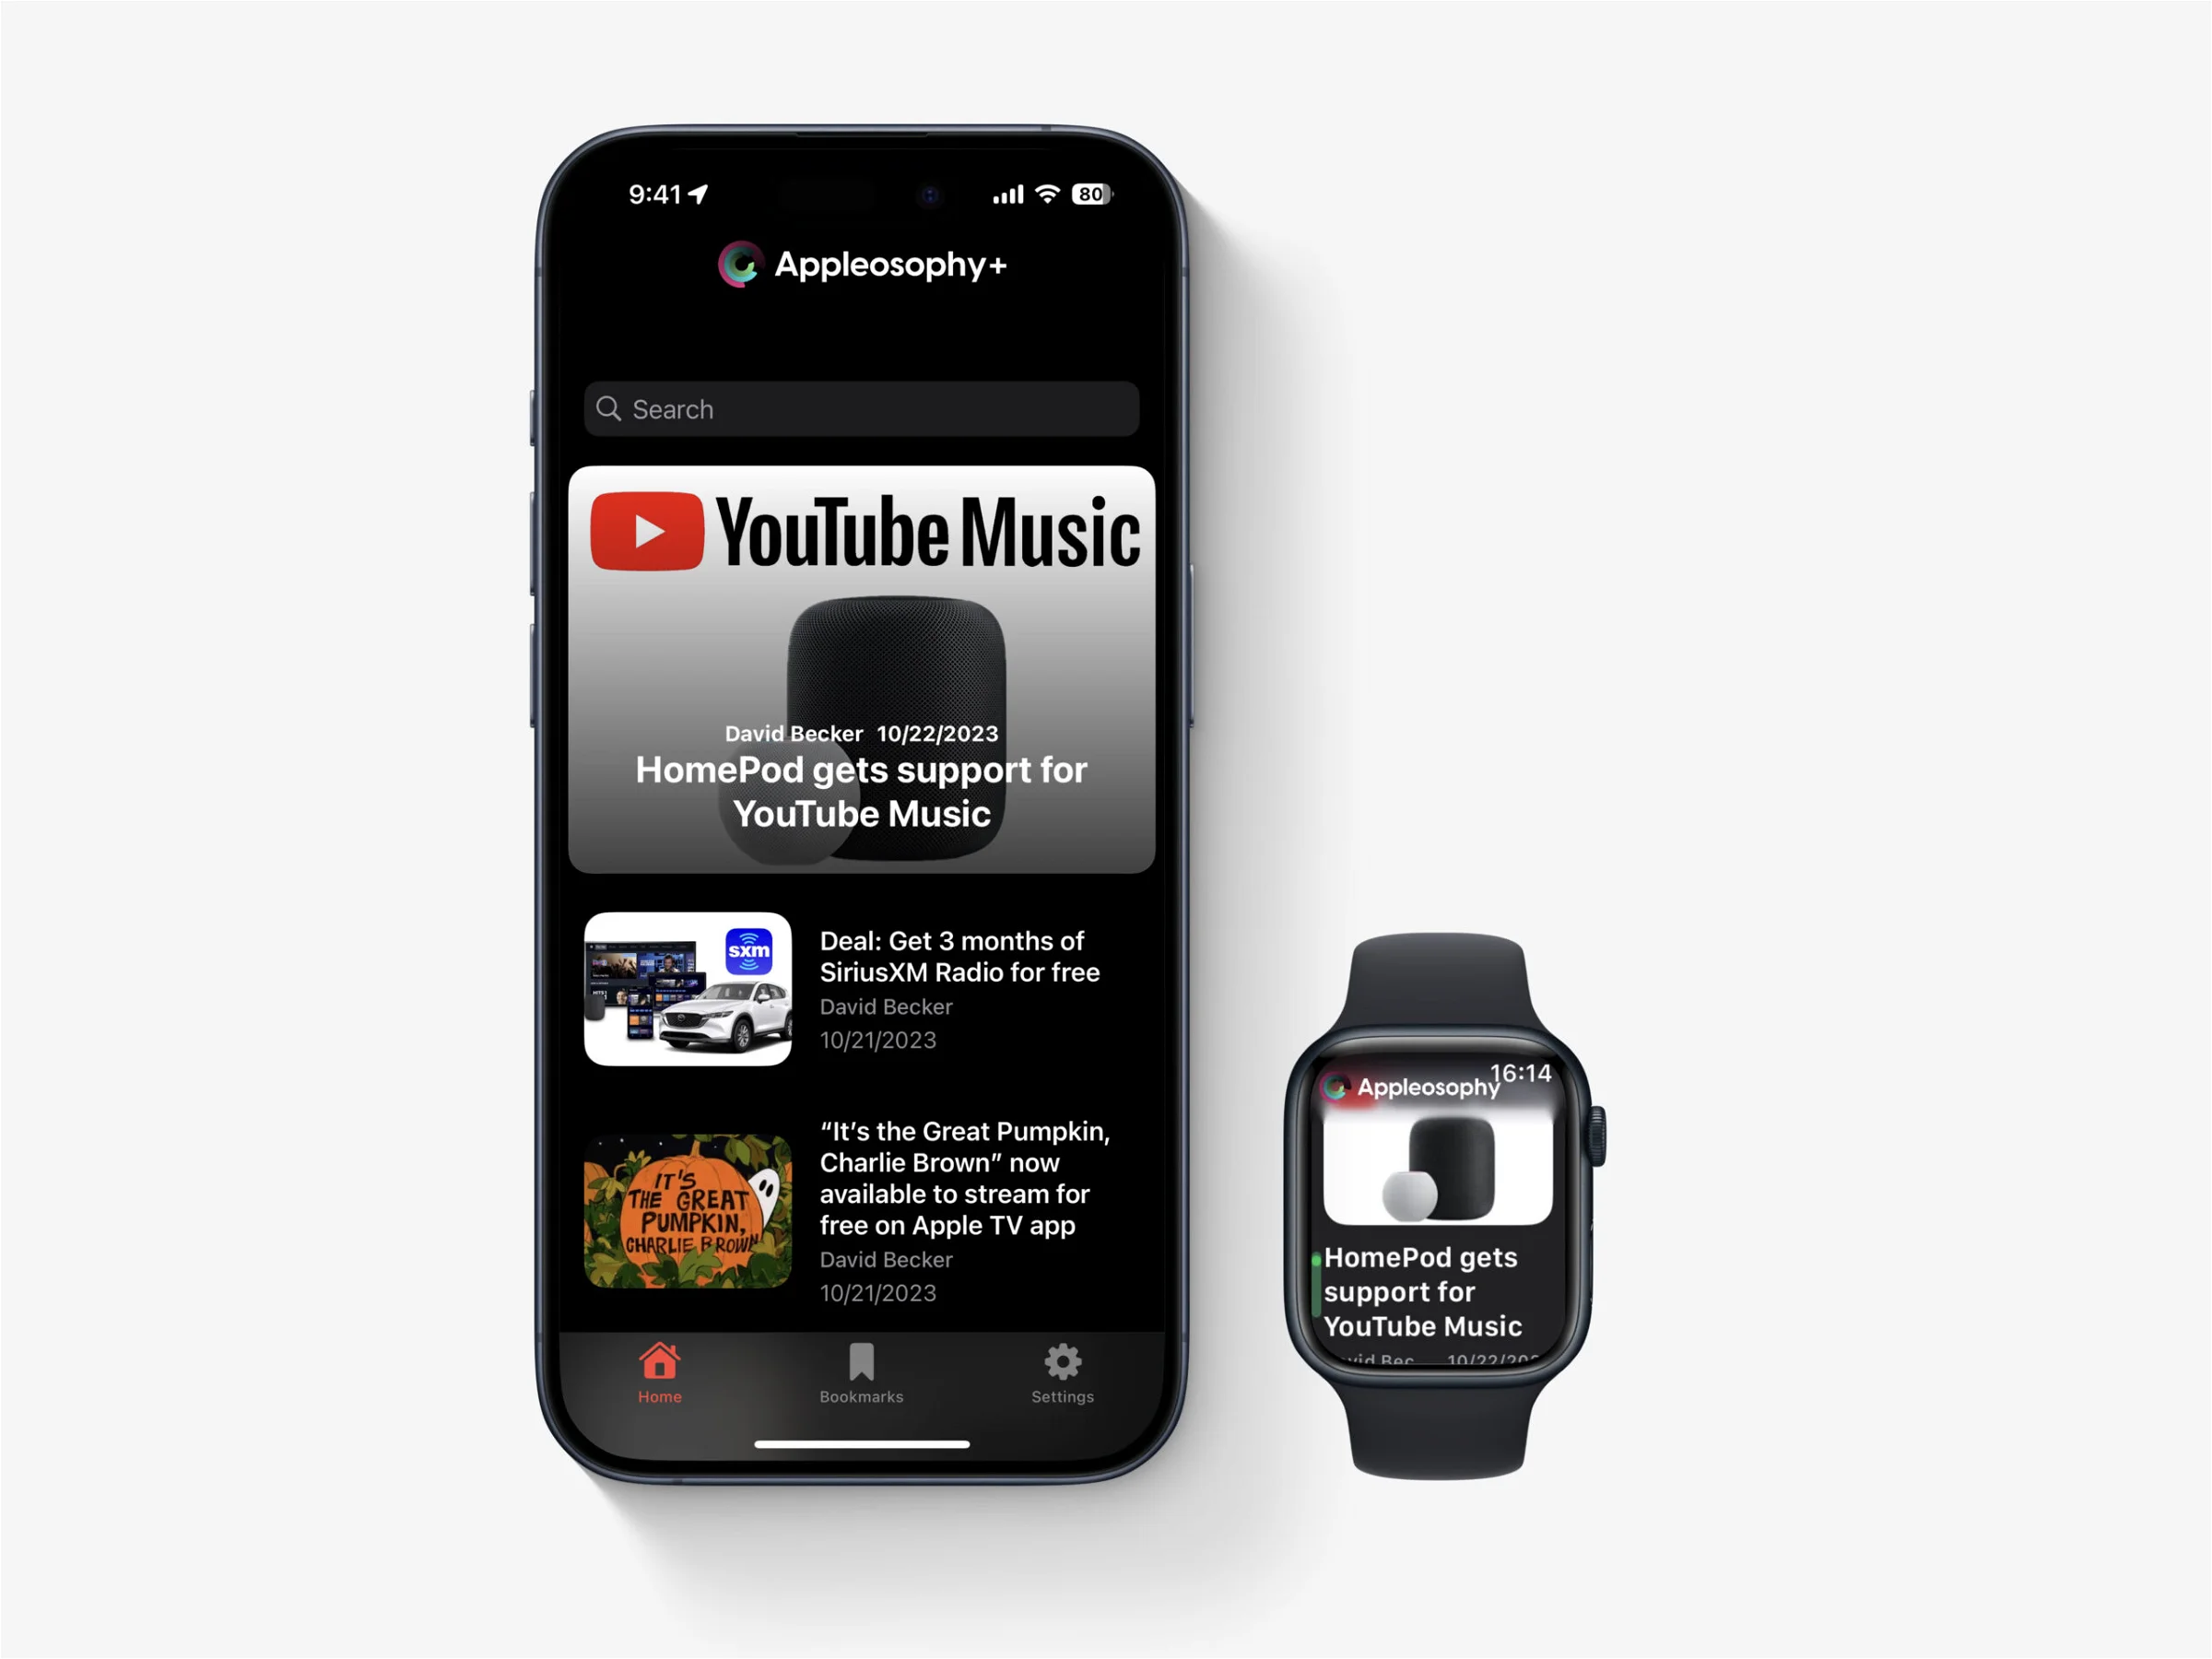 Appleosophy Unveils App Version 2.0, Now Featuring Apple Watch Support and More